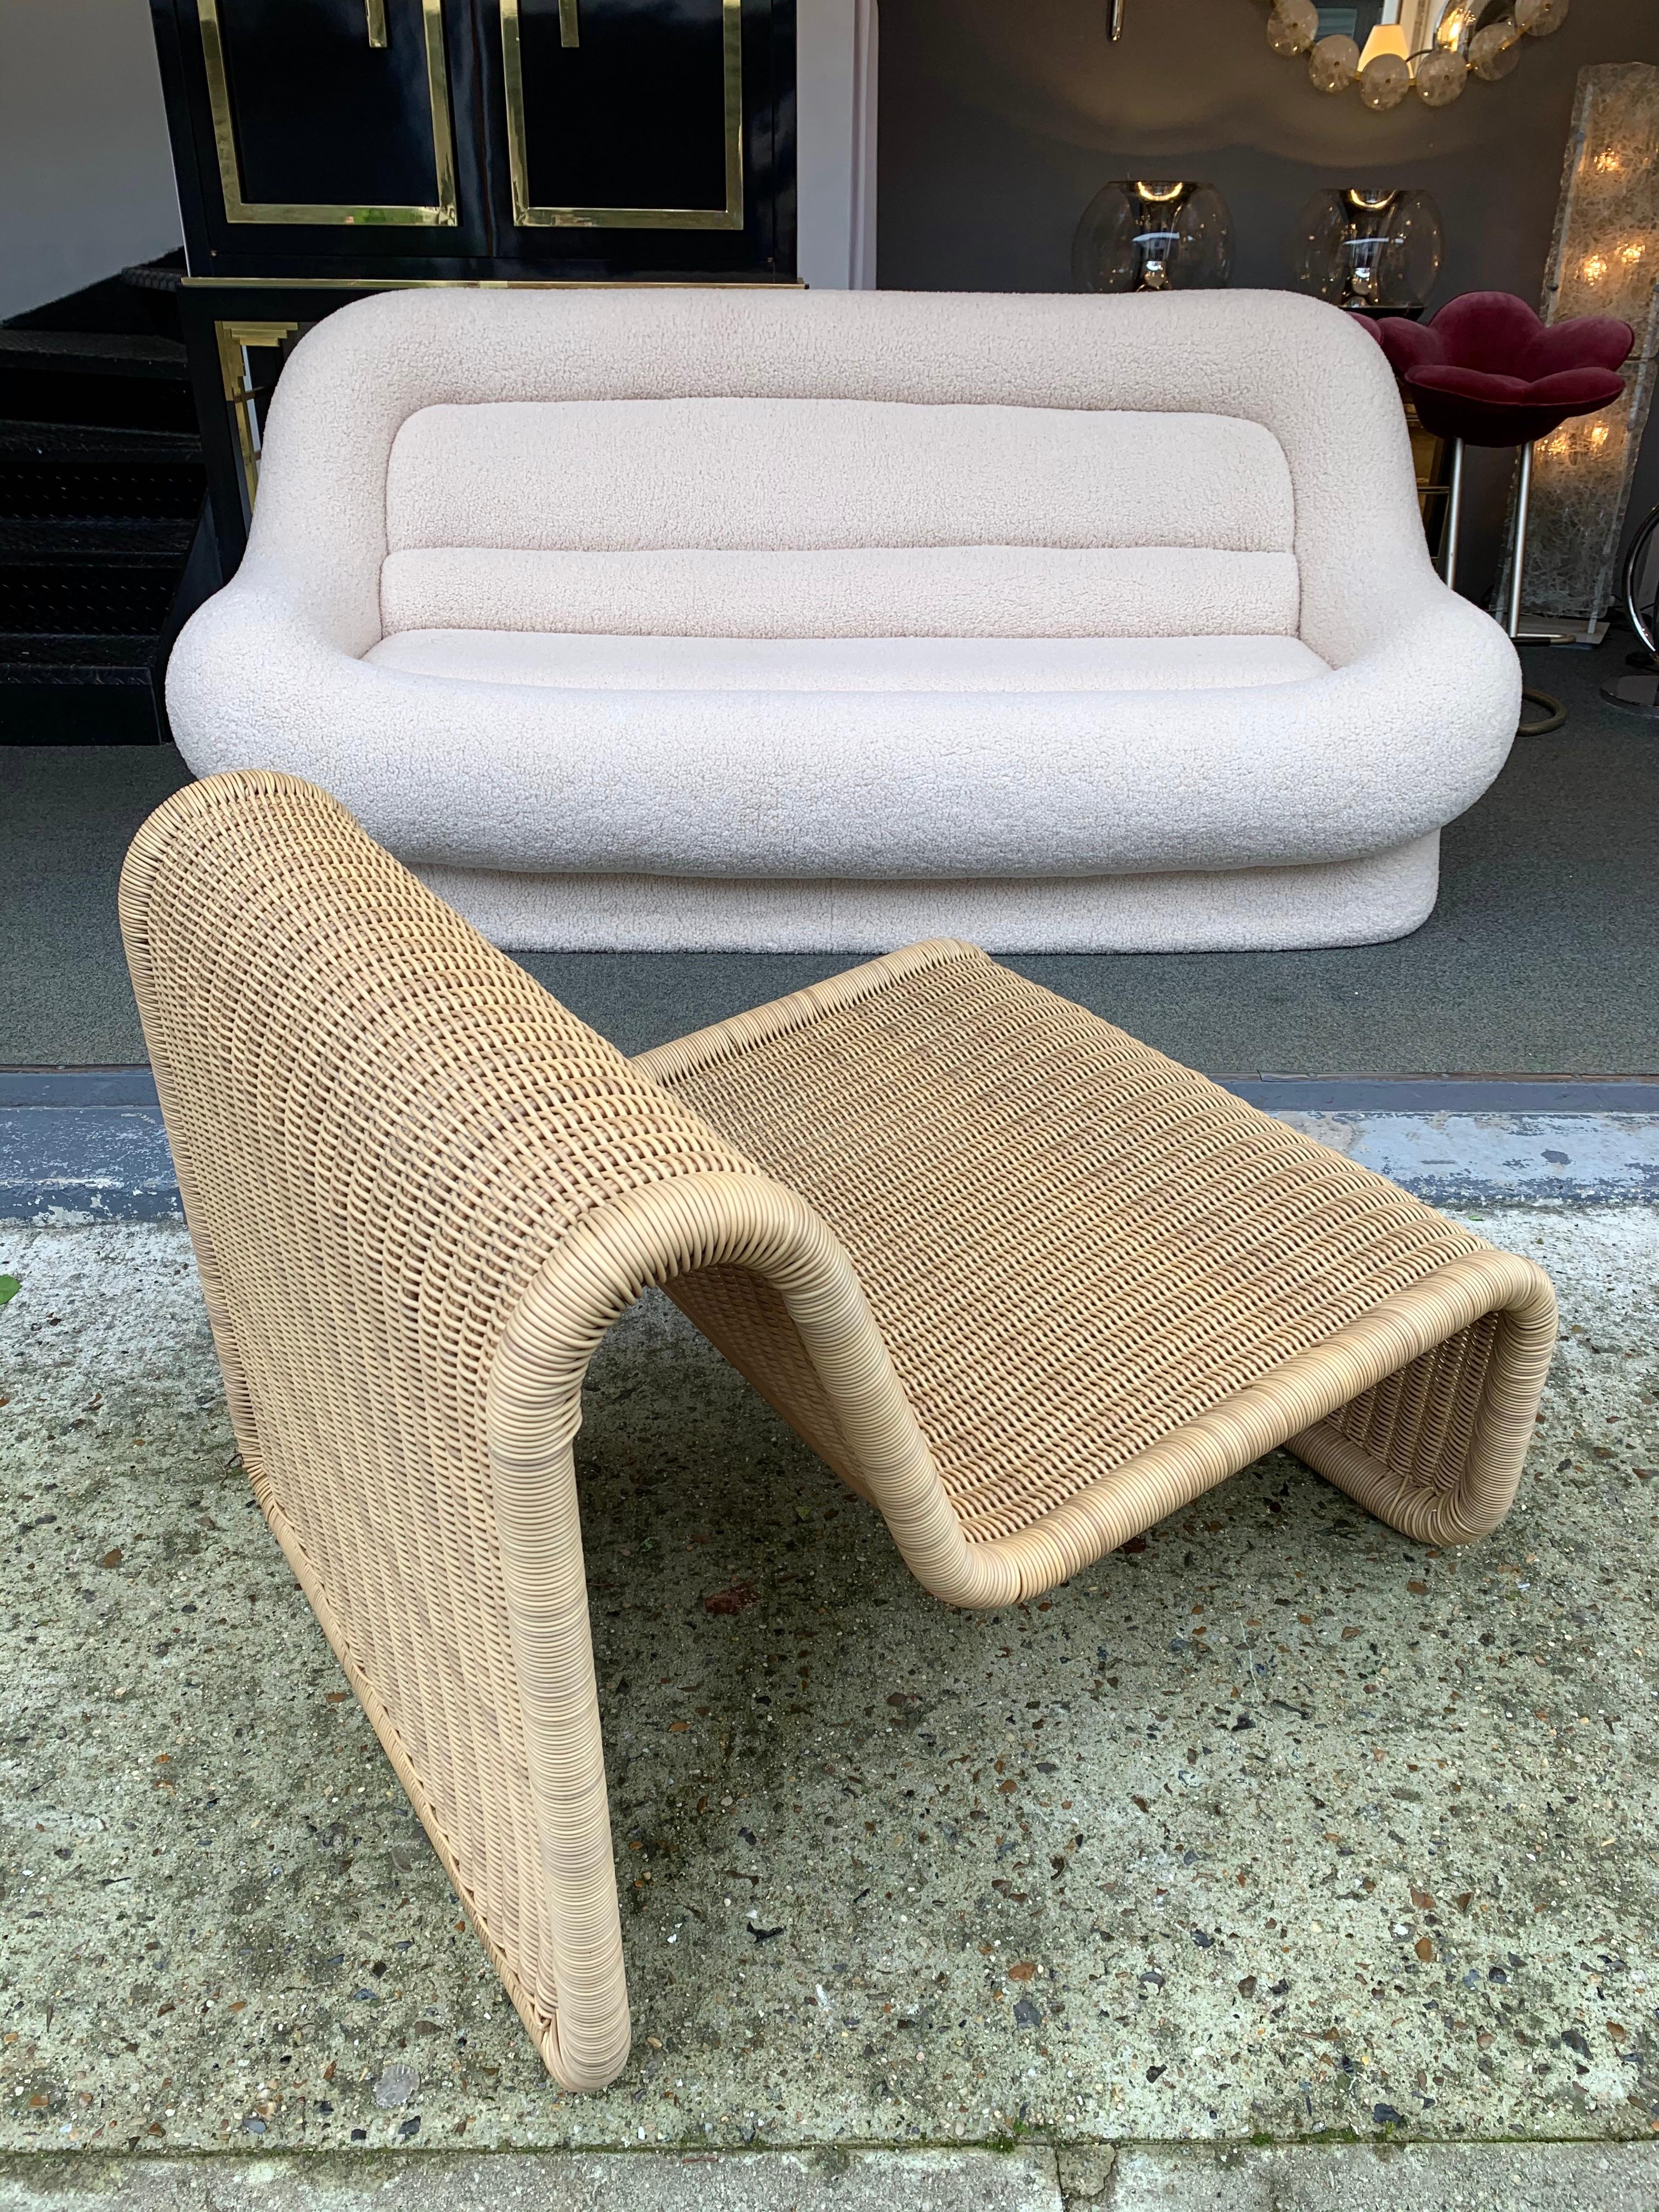 High quality braid synthetic policore style rattan used from the 1980s, very resistant and perfect for outdoor. Slipper lounge chair or armchair model P3 by the designer Tito Agnoli. Famous design like Gio Ponti, Gianfranco Frattini, Cassina,